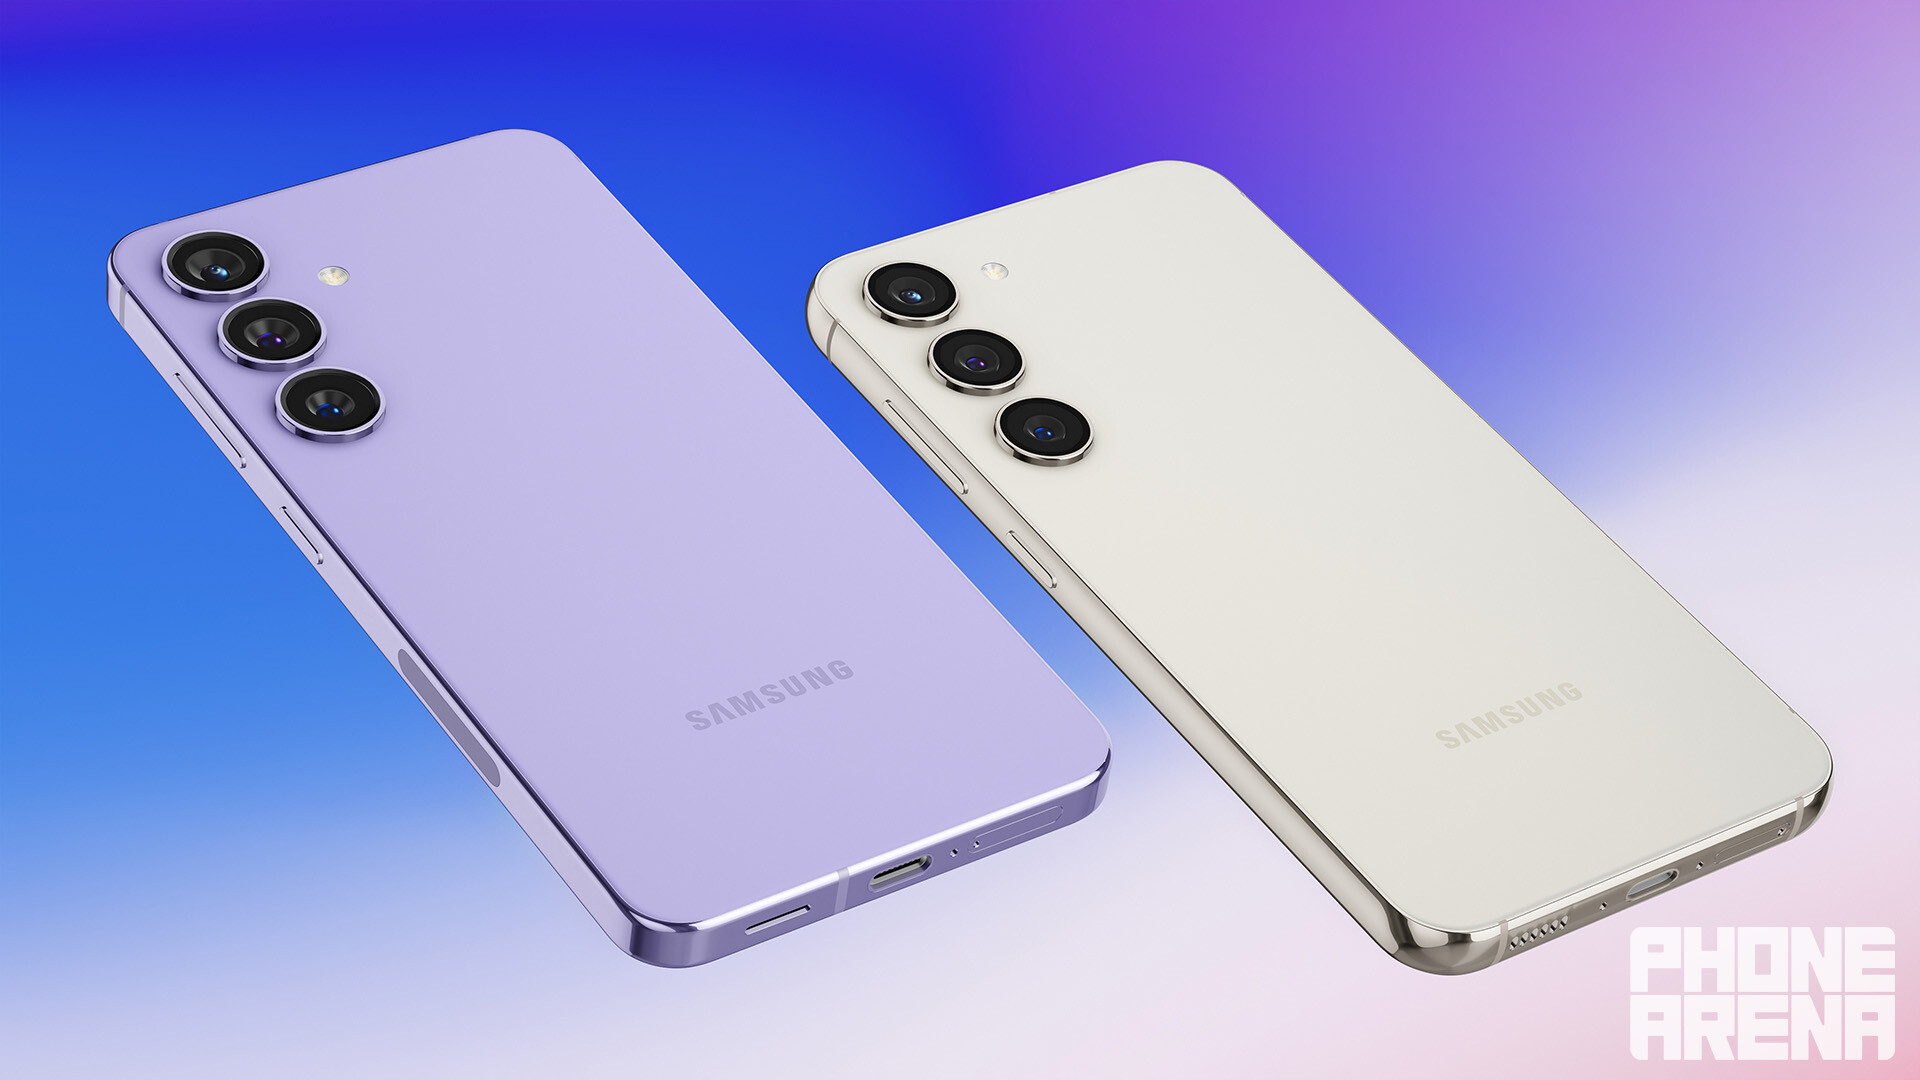 Galaxy S24 on the left, Galaxy S23 on the right.  - Here's what the Galaxy S24 would look like next to the S23 if the rumors prove true